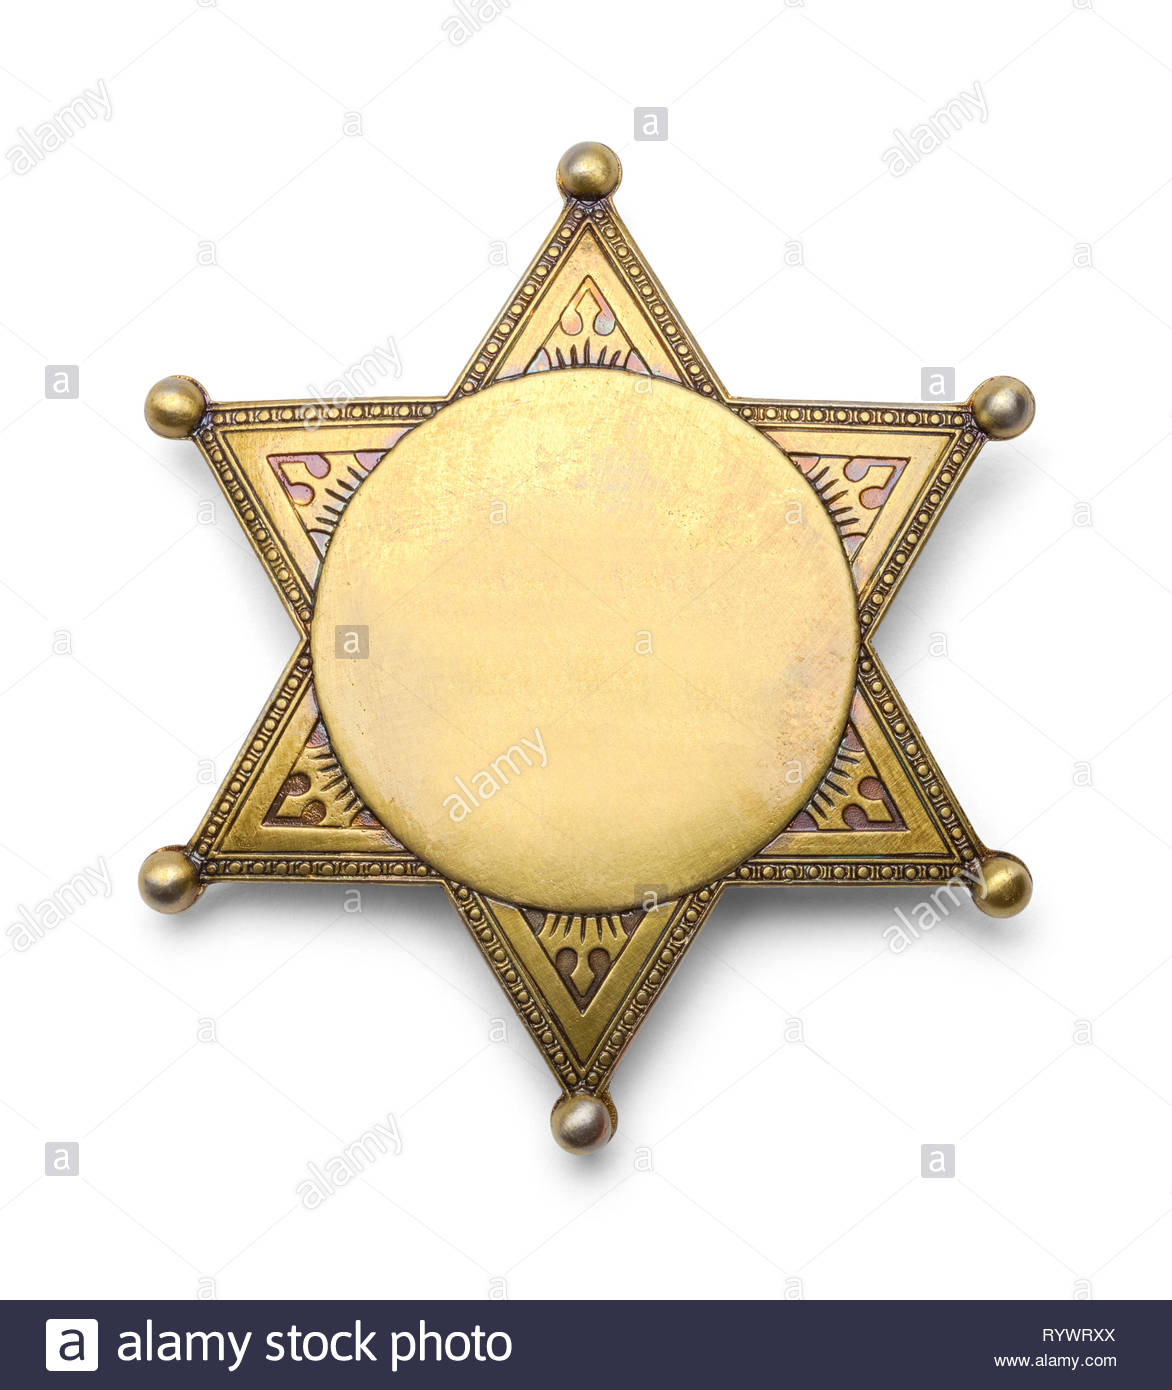 Blank Police Star Badge Isolated On White Background Stock Photo